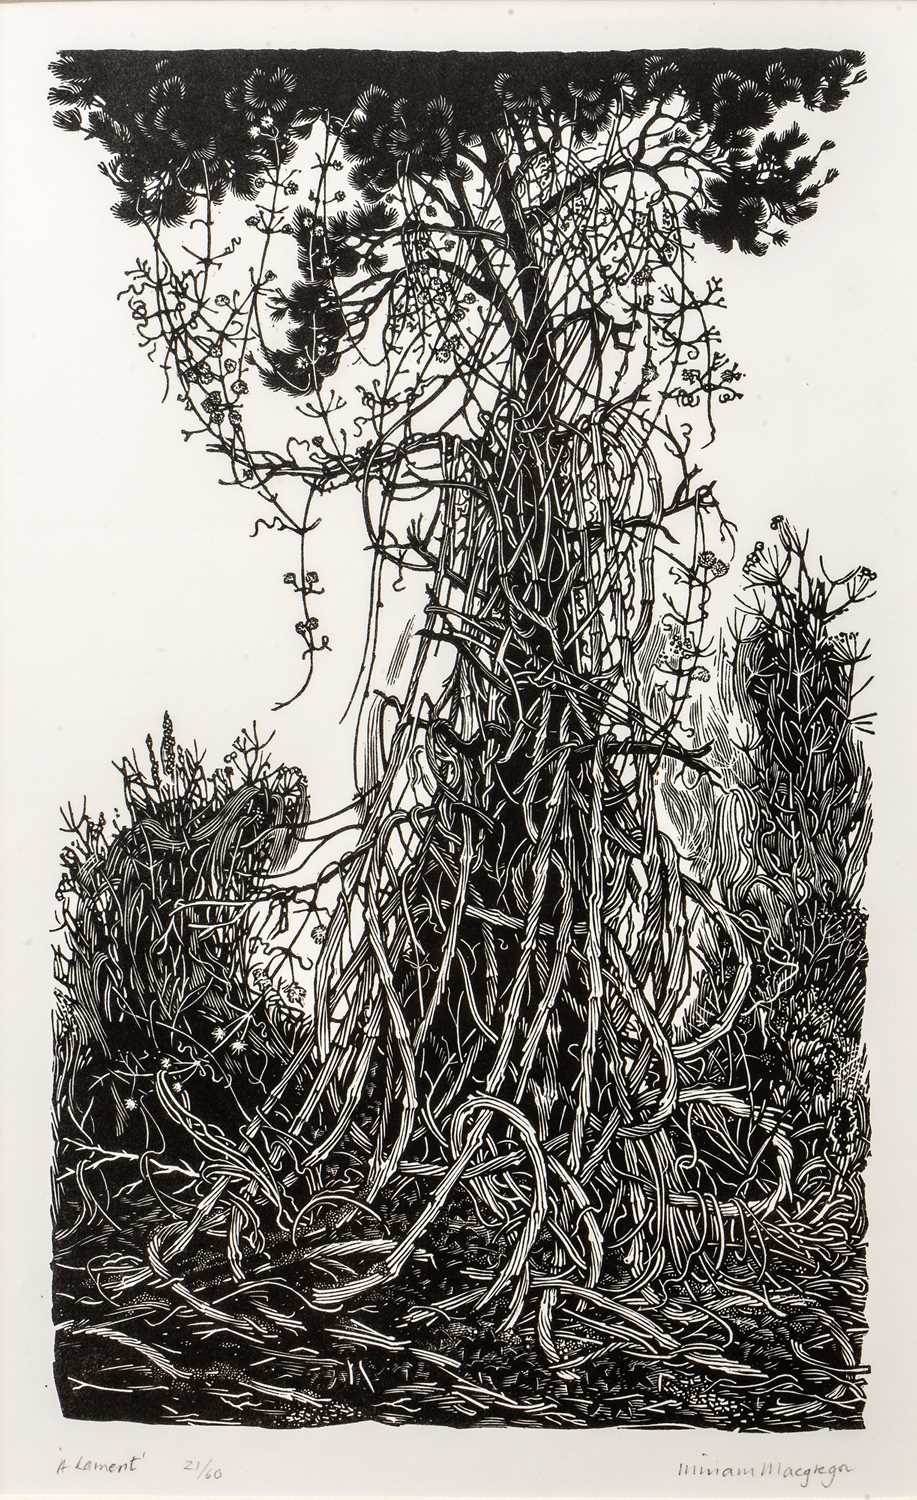 Miriam MacGregor (b.1935) 'A lament', wood engraving, numbered 21/60, signed in pencil lower